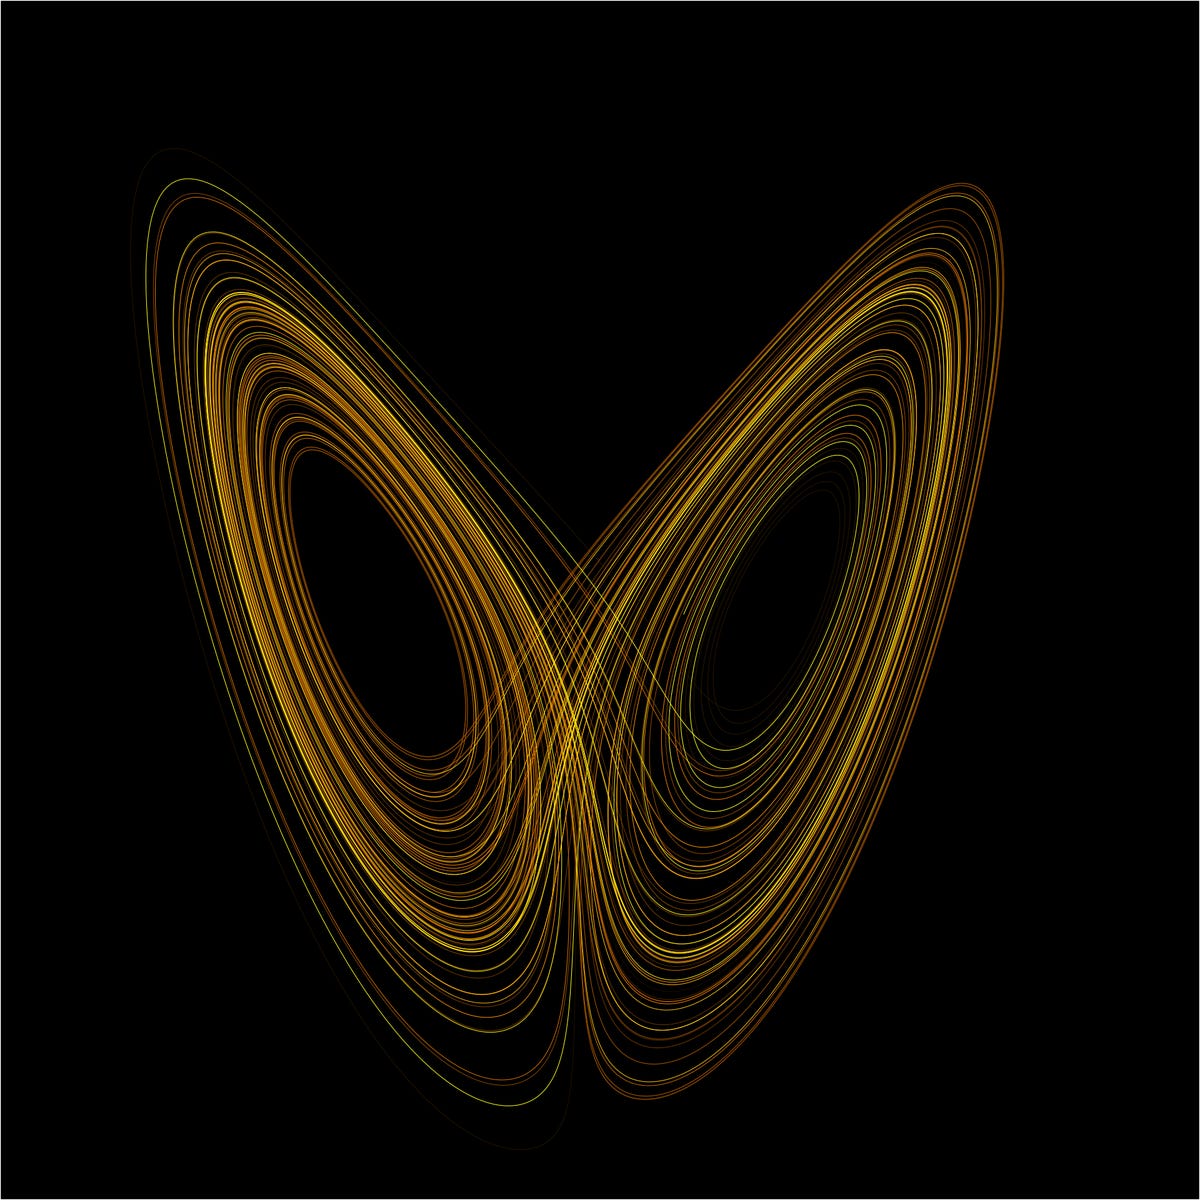 A swirling golden graph on top of a black background.